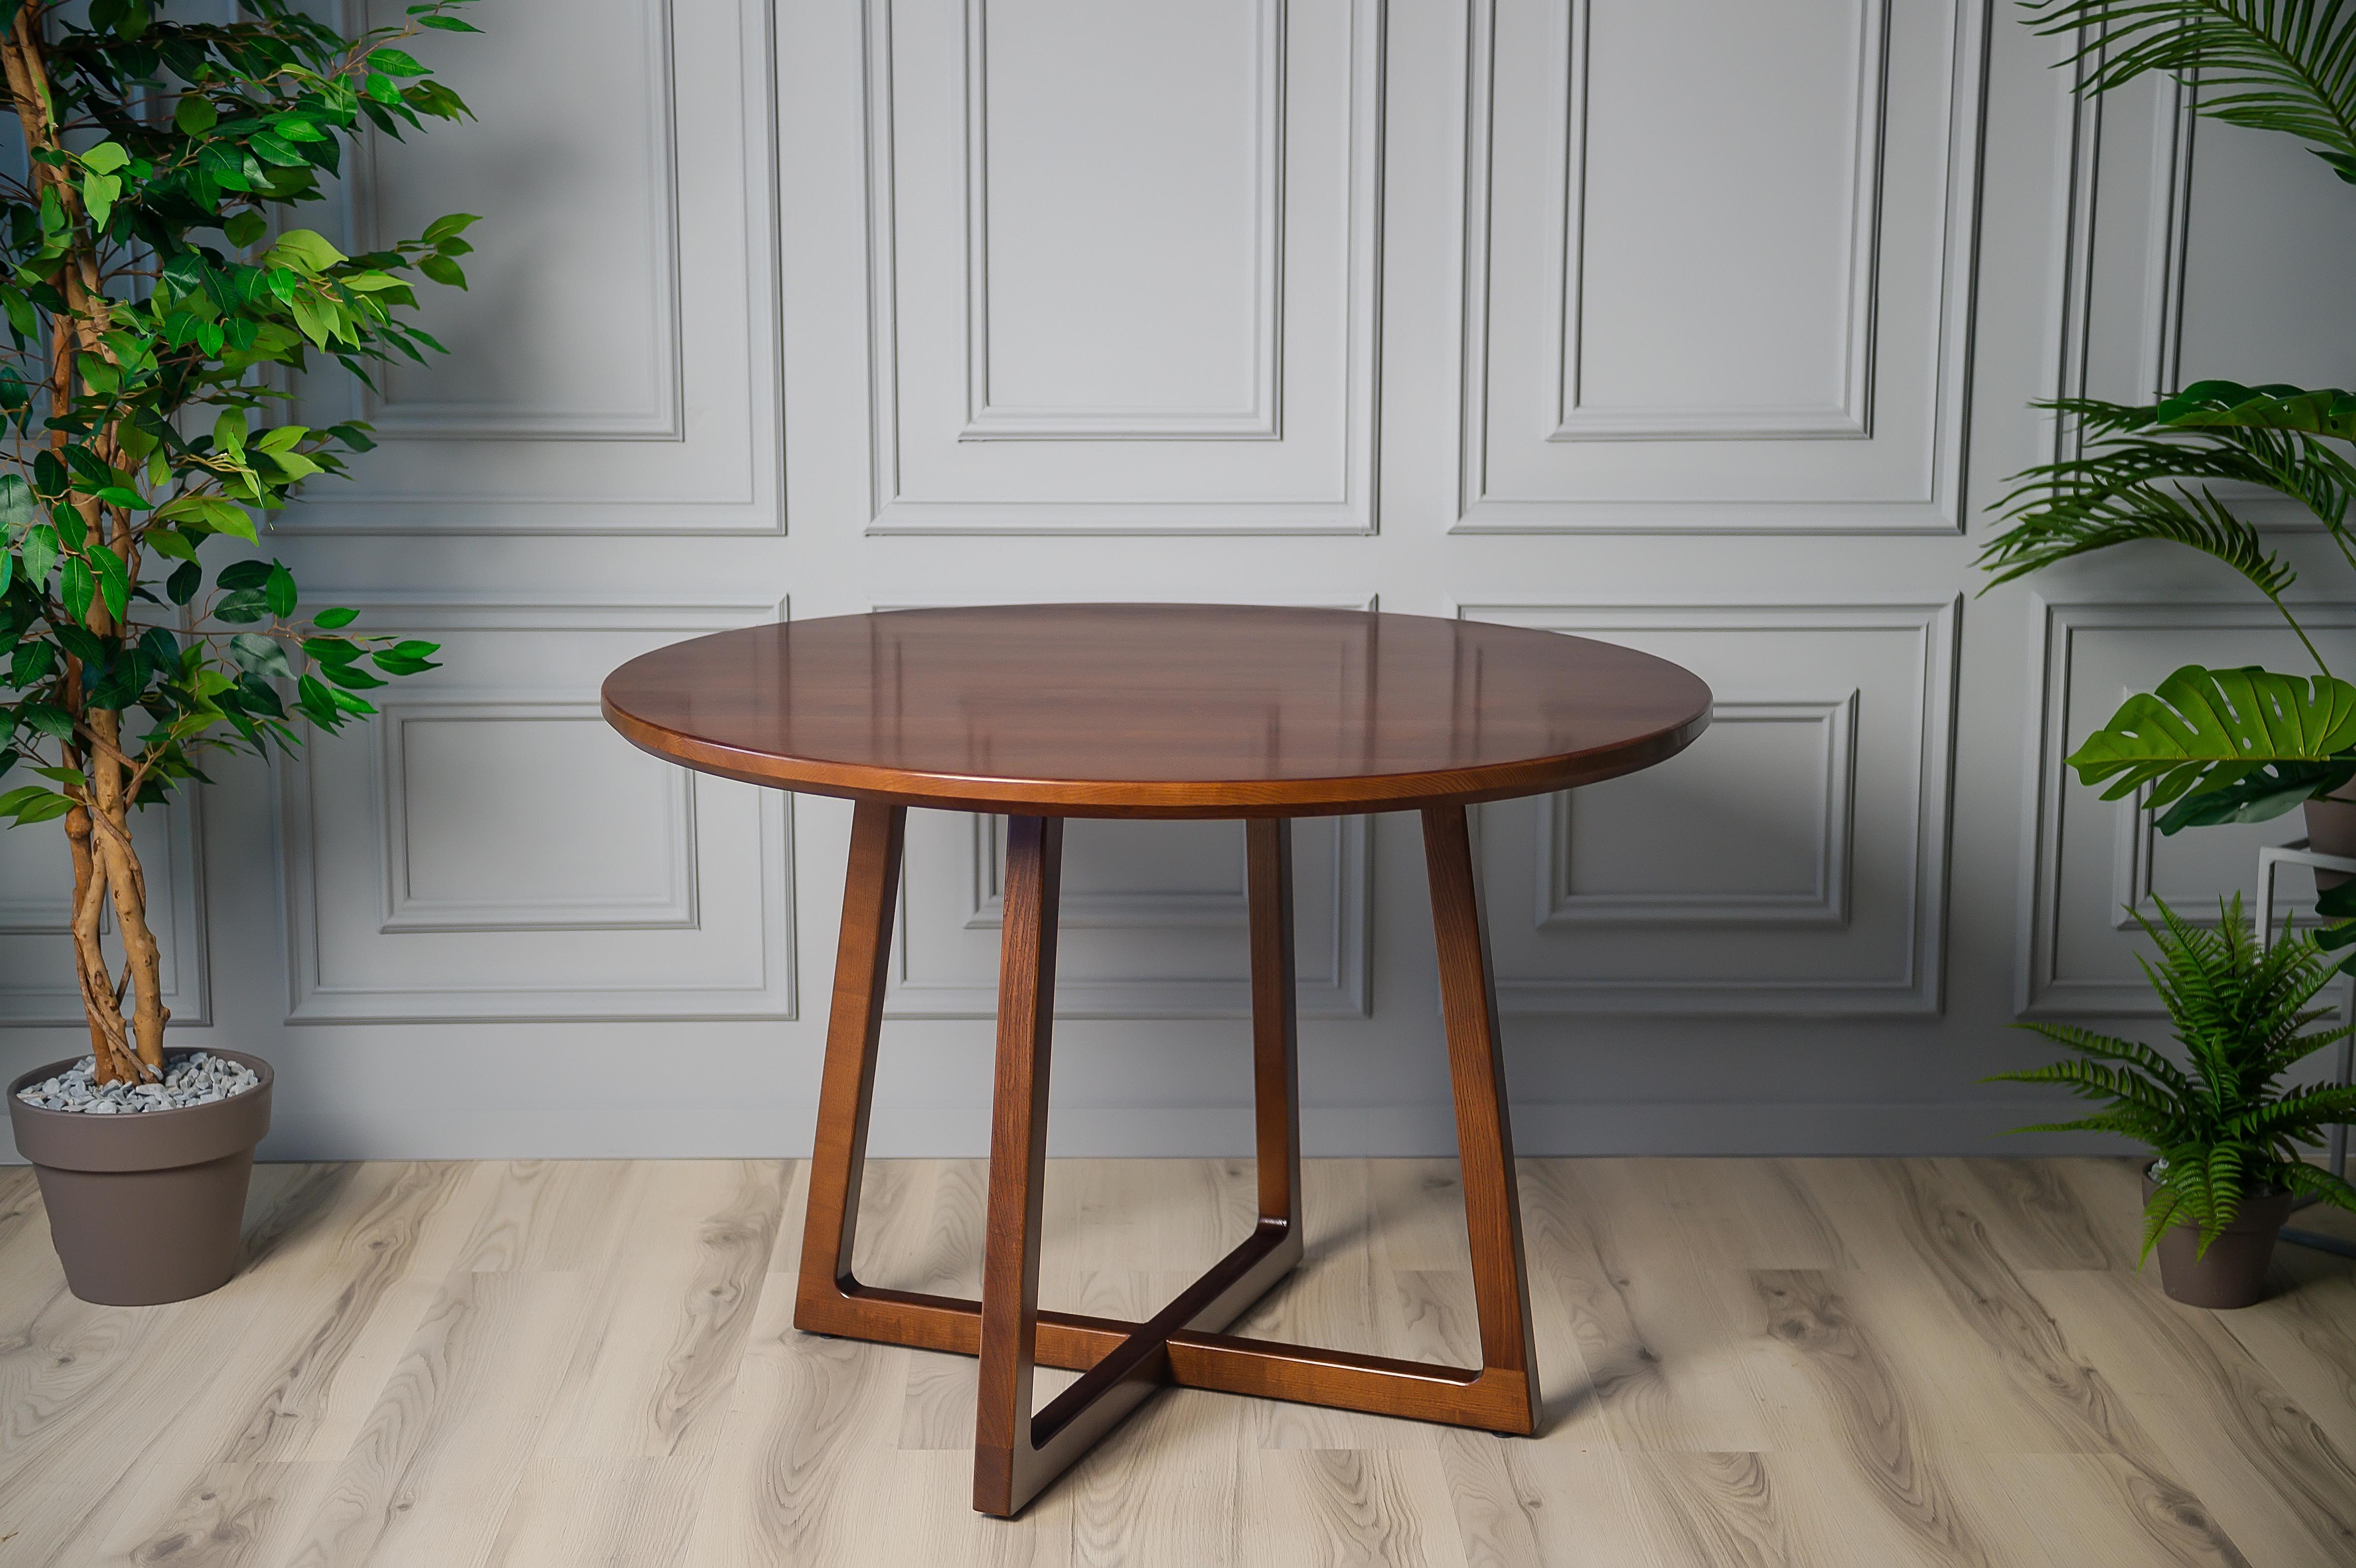 The ellis table is pulled straight out of the 60’s and we love it. The style that may remind you of Mad Men or Marvelous Mrs. Maisel is perfect for the kitchen but can also fit great into a basement that accompanies a bar. Whether it’s for cards or